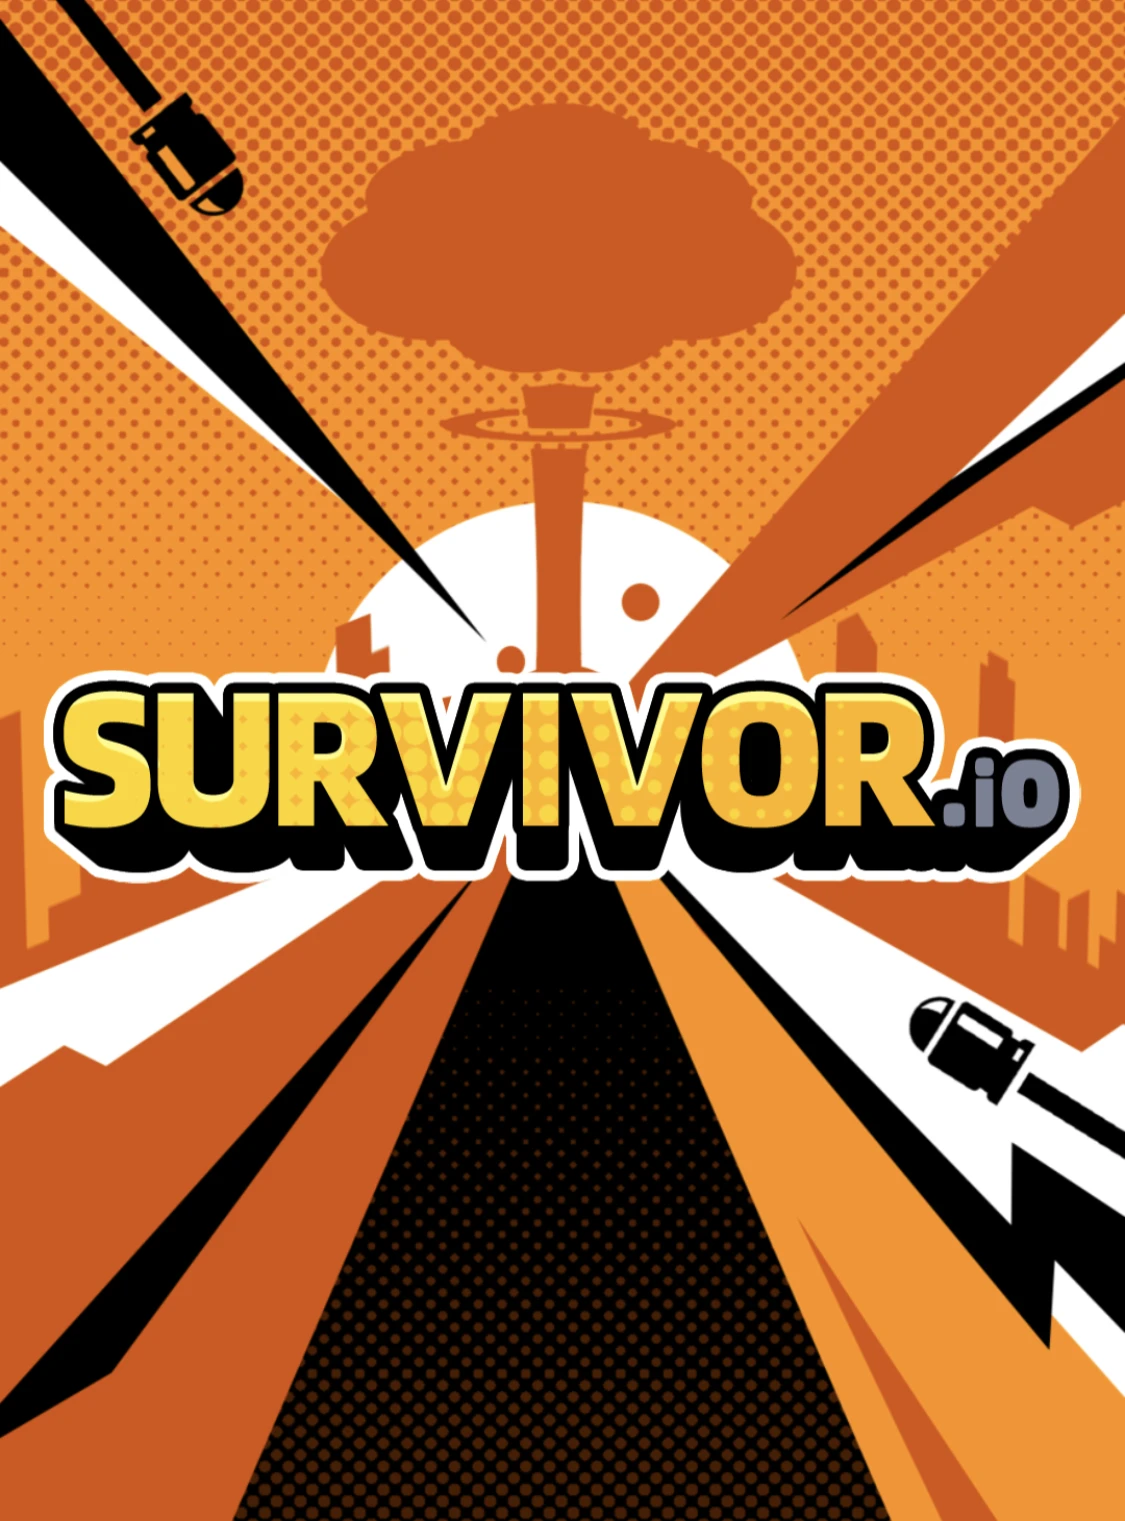 Survivor.IO Skills Tier List With Best Recommendations-Game Guides